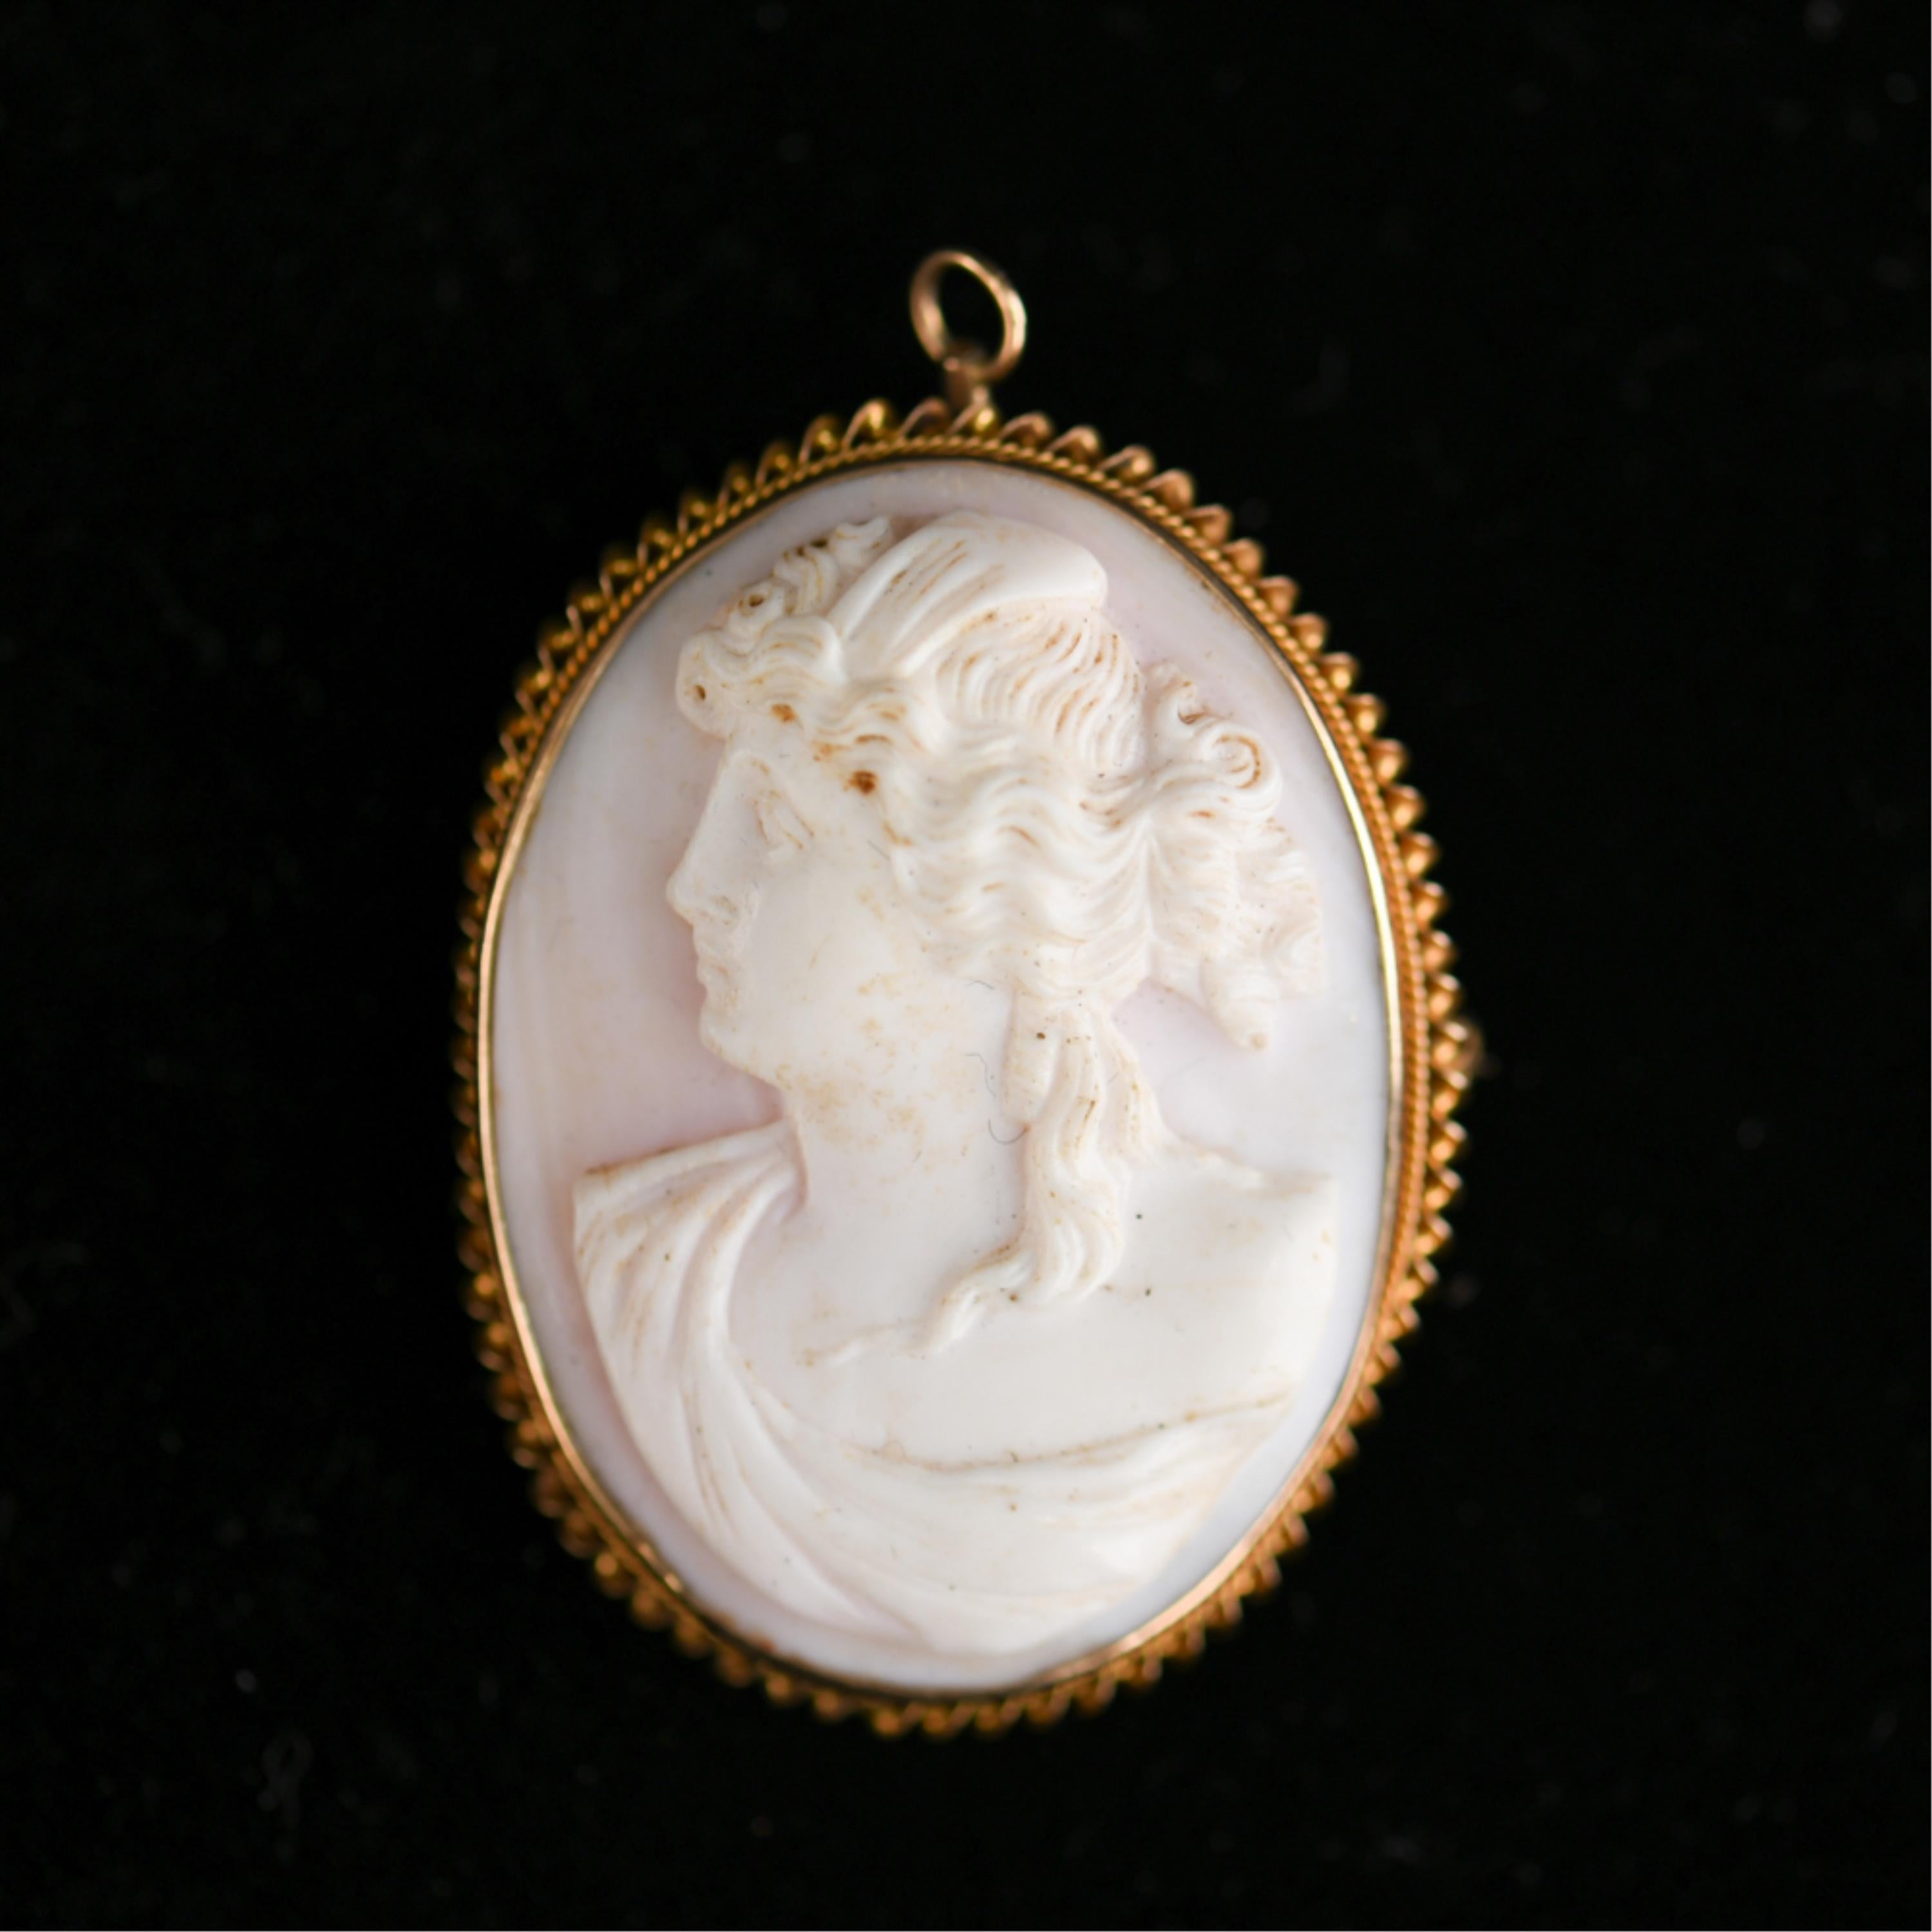 14-karat yellow gold and hard shell cameo. Can be worn as a pendant or a brooch.